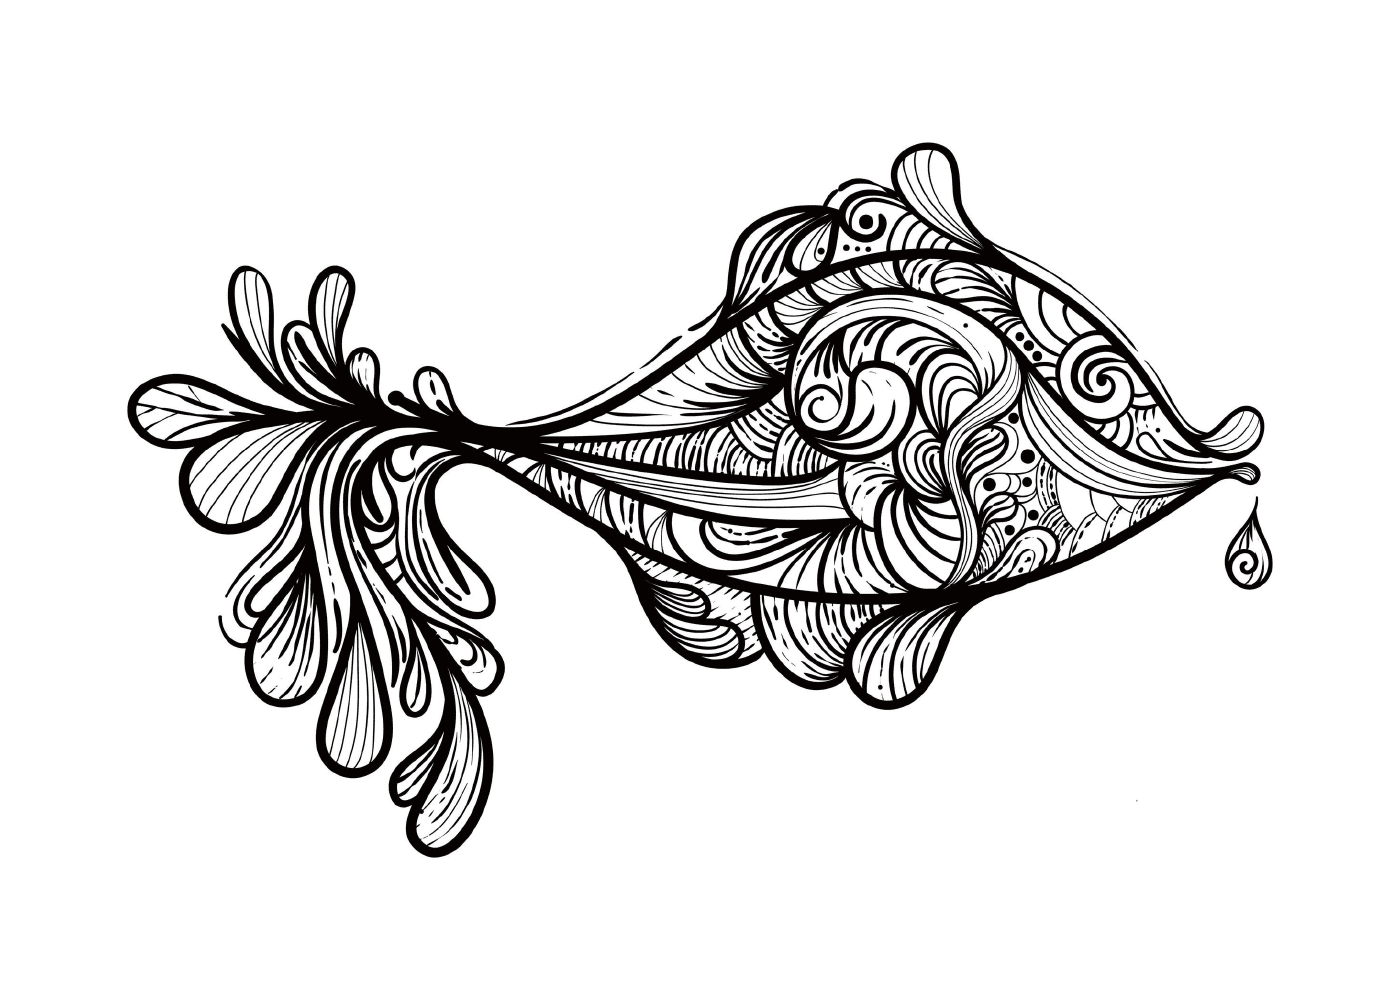  Fish with swirling patterns 